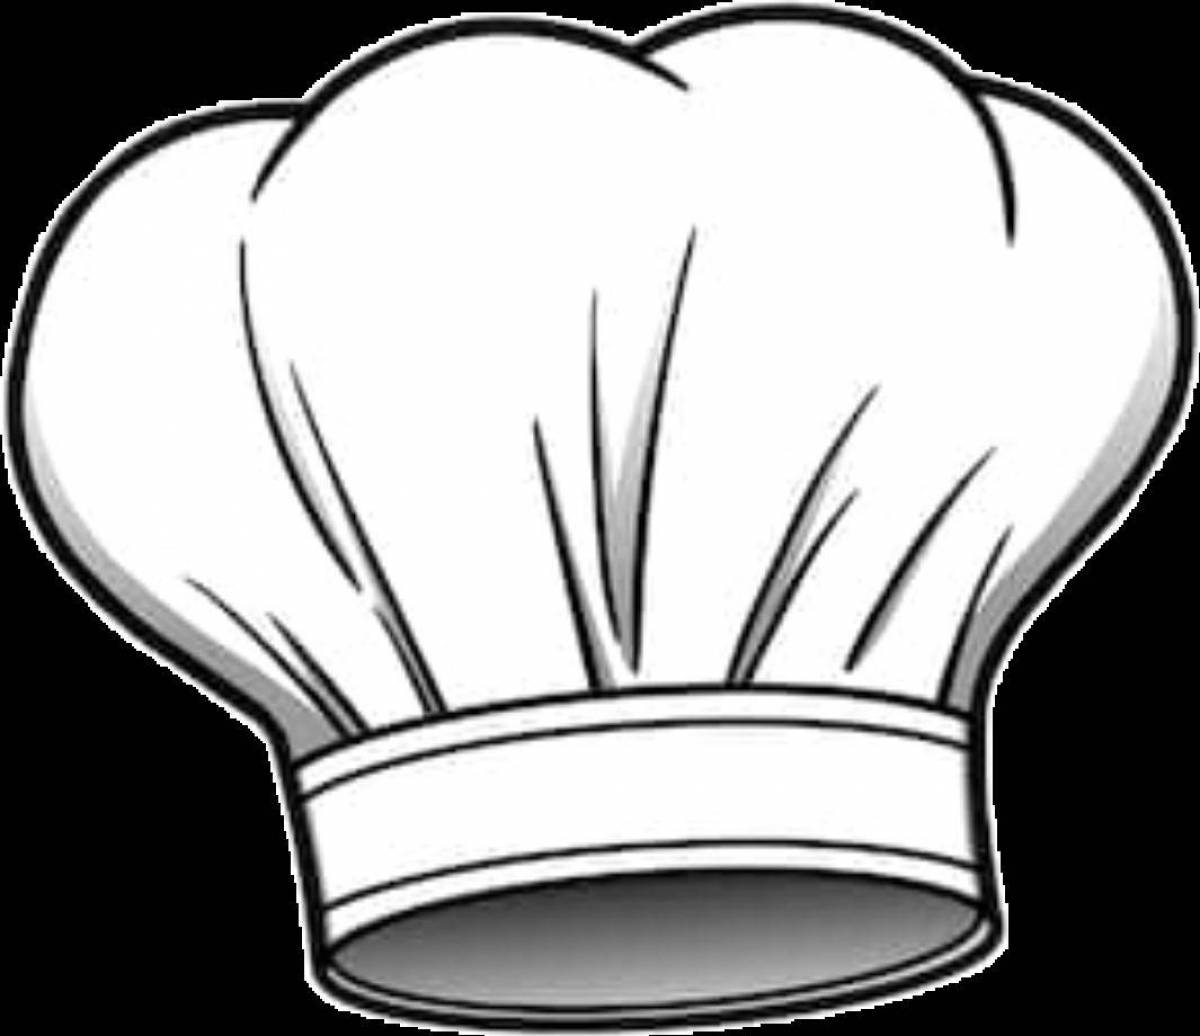 Colourful chef hat coloring page